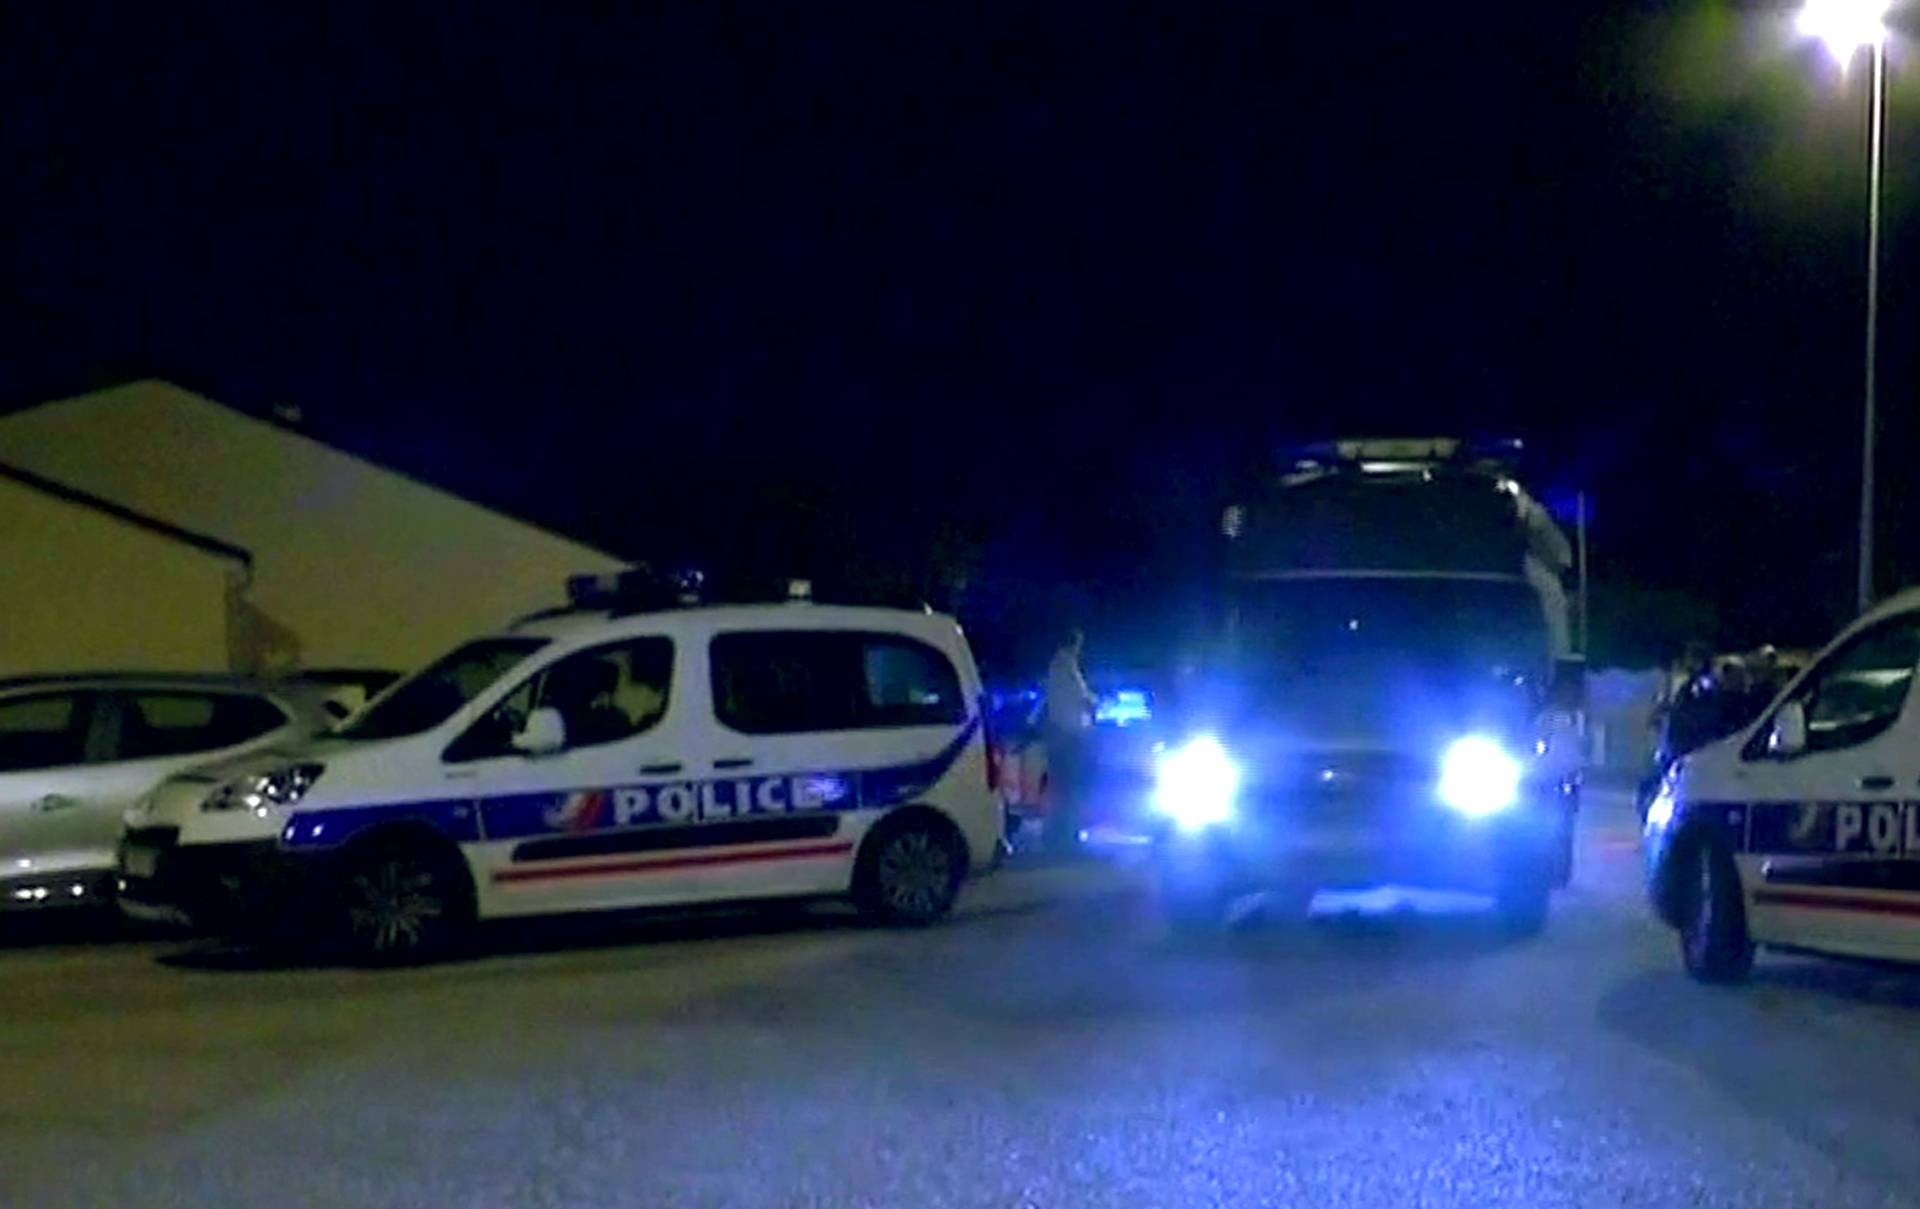 Police vehicles at the scene where a French police commander was stabbed to death in front of his home in the Paris suburb of Magnanville